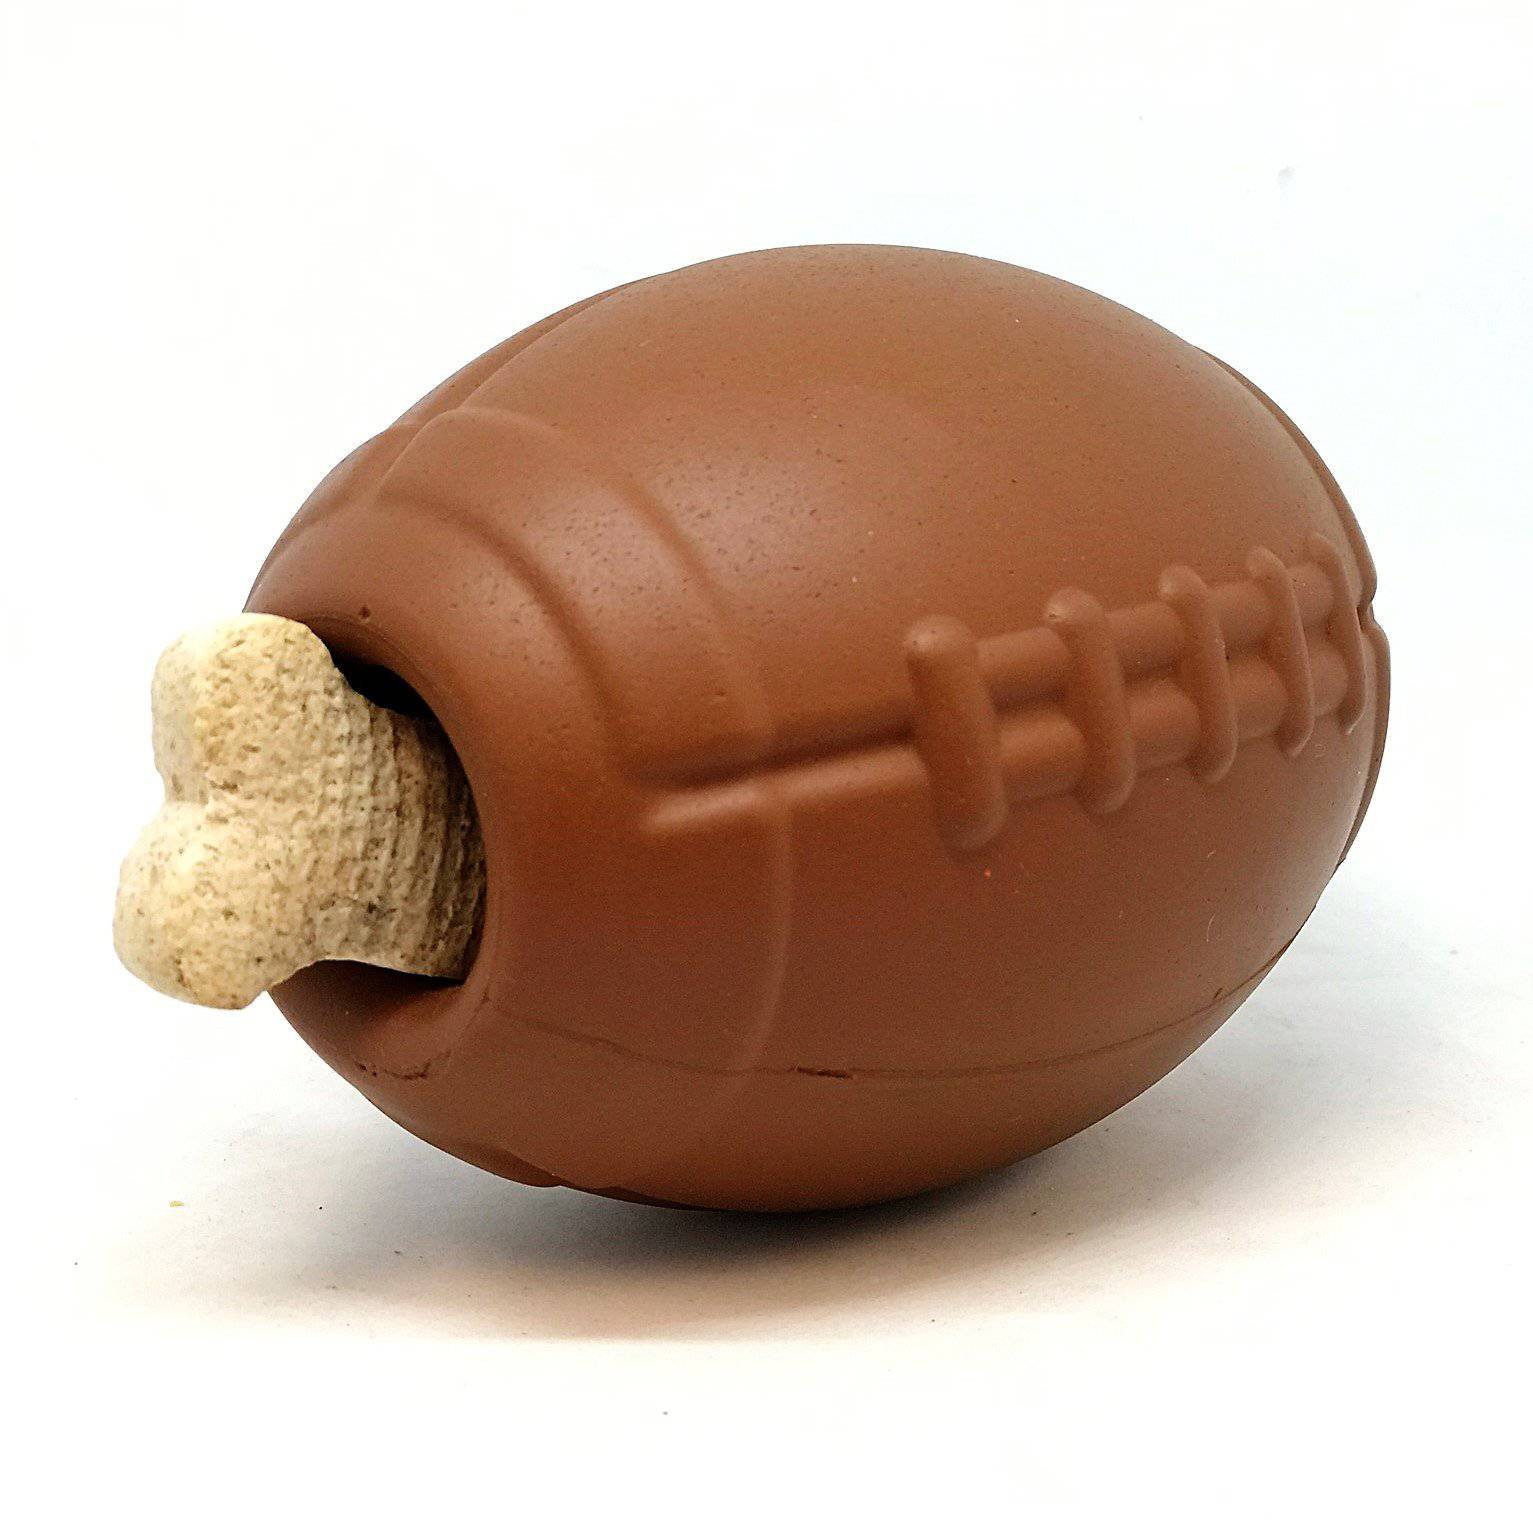 SODAPUP CHEW TOY FOOTBALL